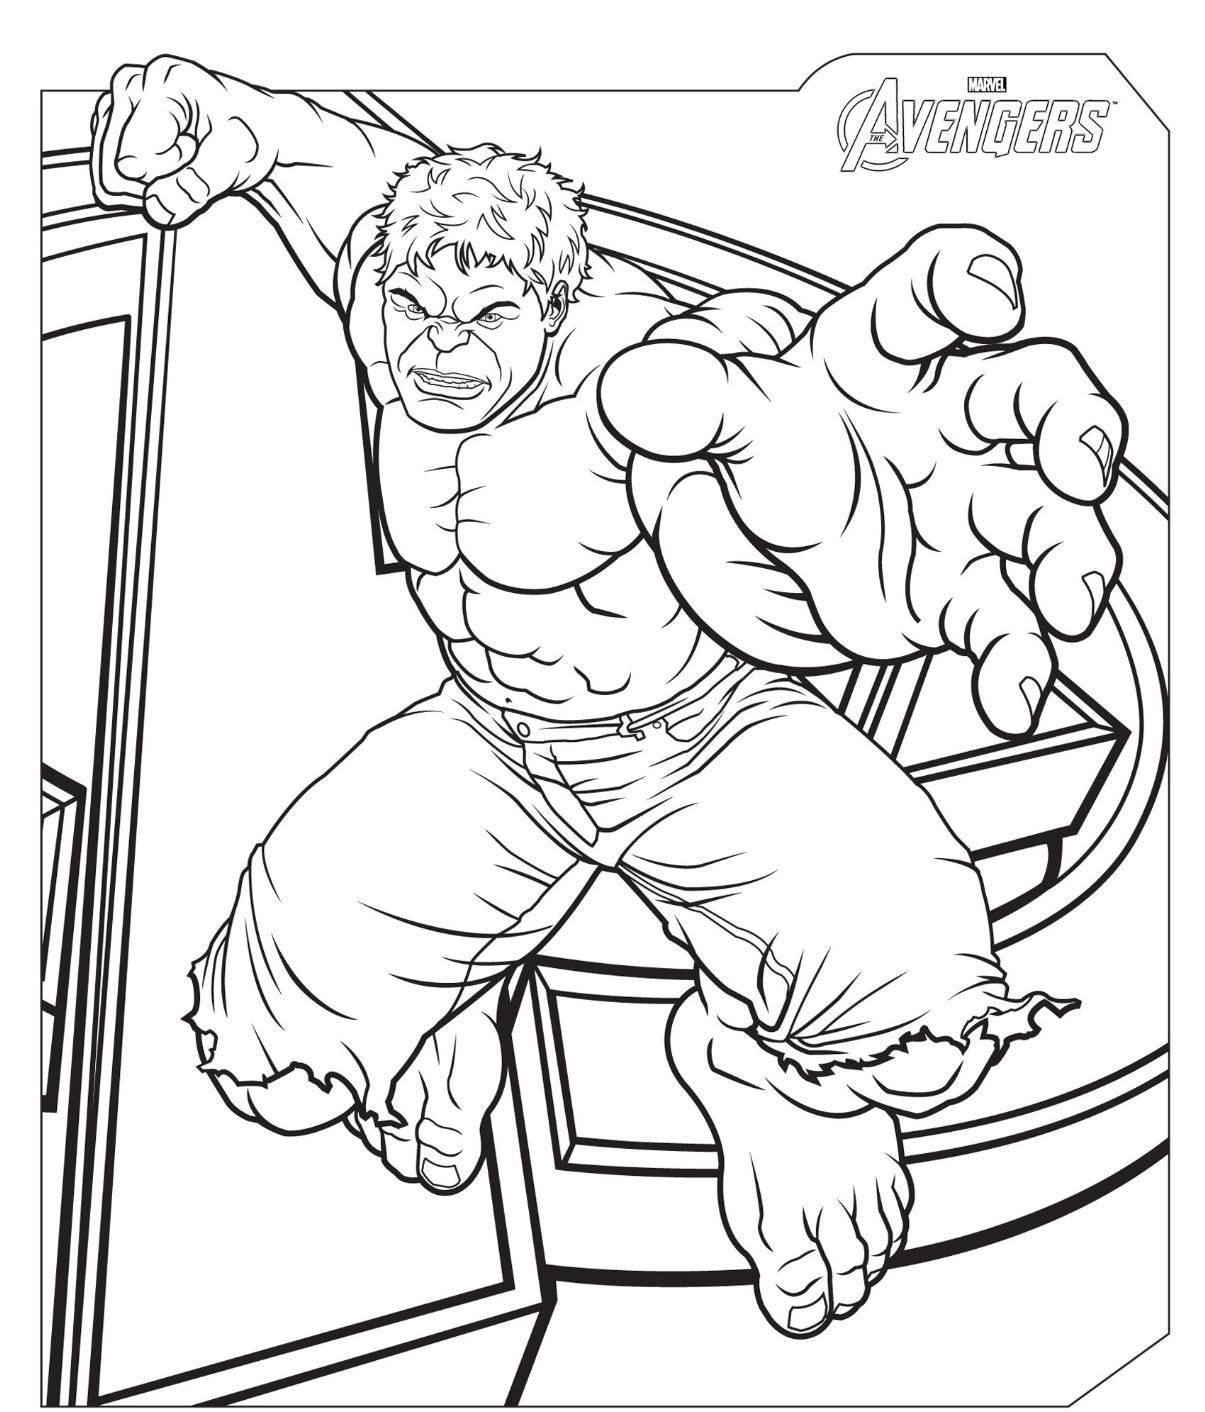 avengers coloring pages - Google Search | art | Pinterest ...